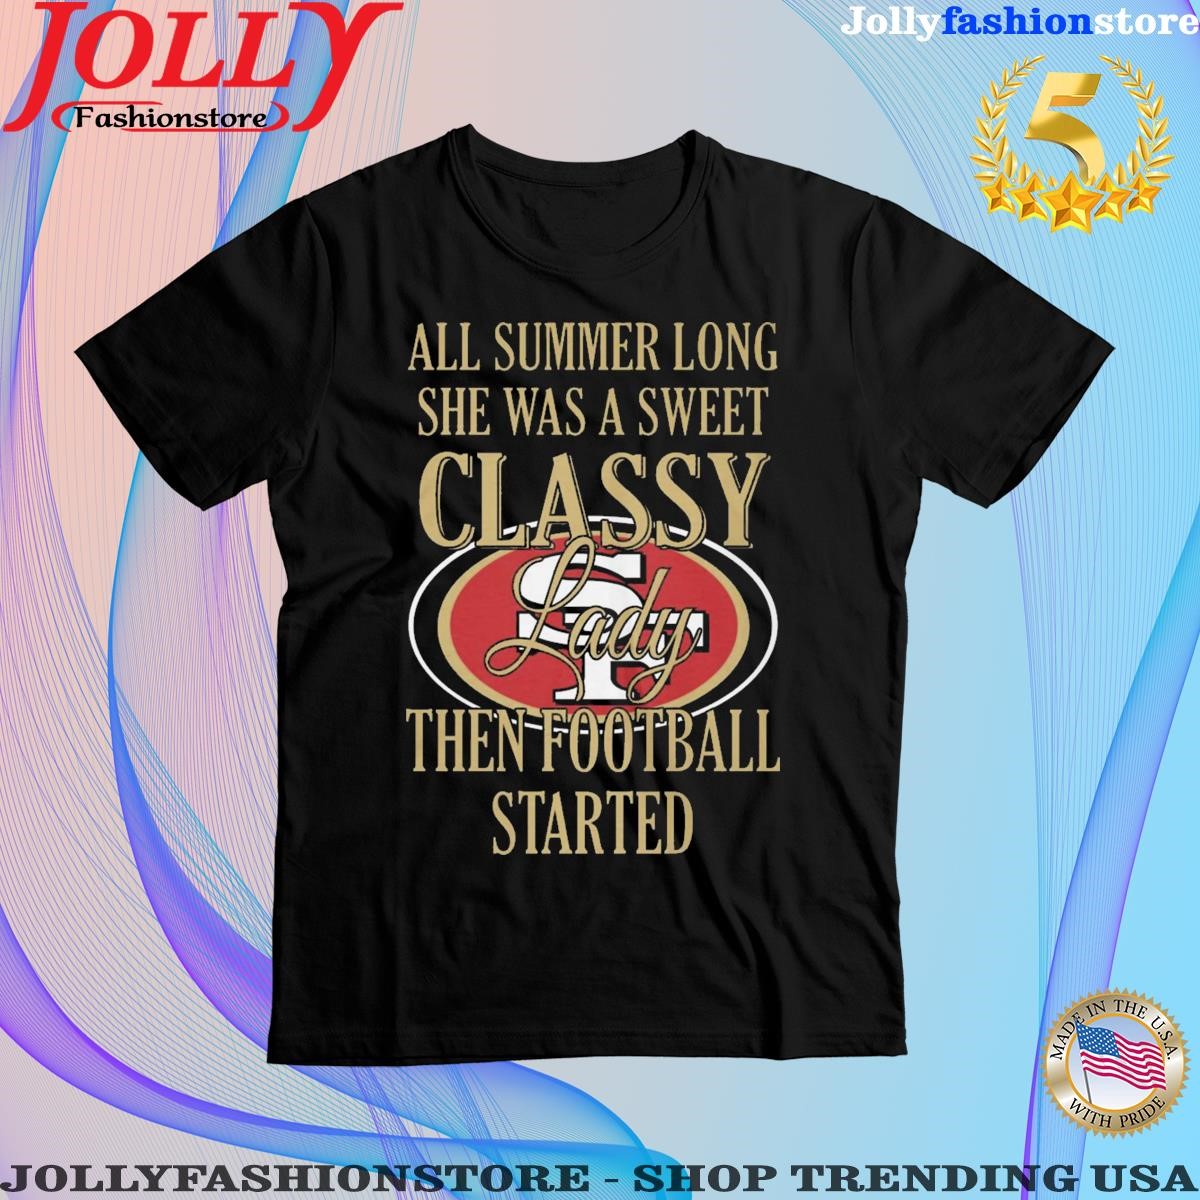 San francisco 49ers summer long she was a sweet classy lady then Football started shirt